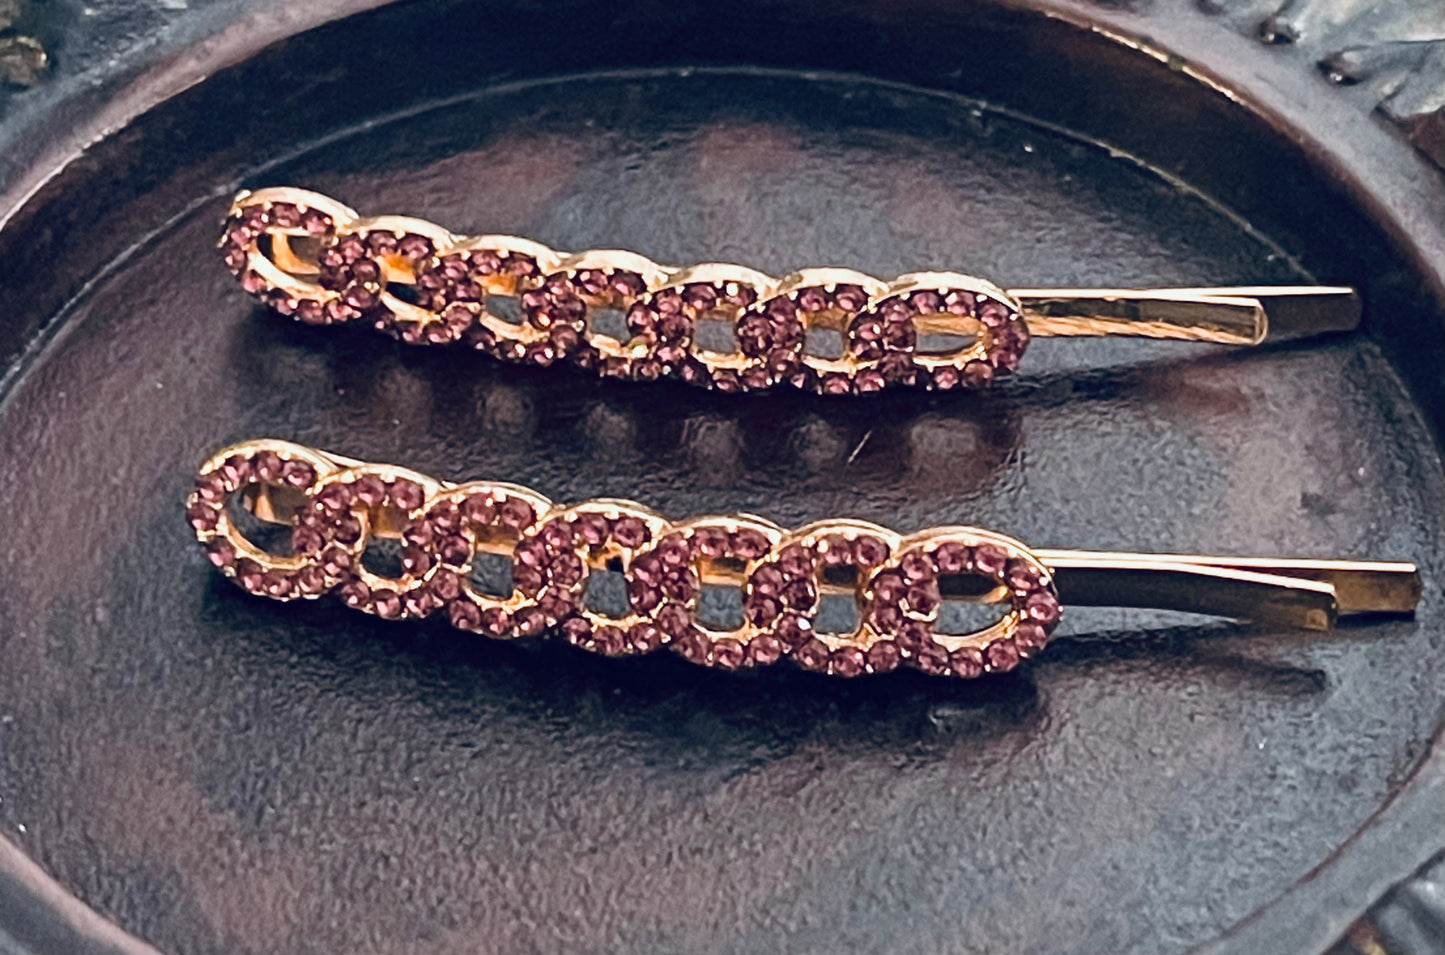 Purple Crystal rhinestone hairpins 2pc approximately 2.5”gold tone  formal hair accessories gift wedding bridesmaid princess accessory